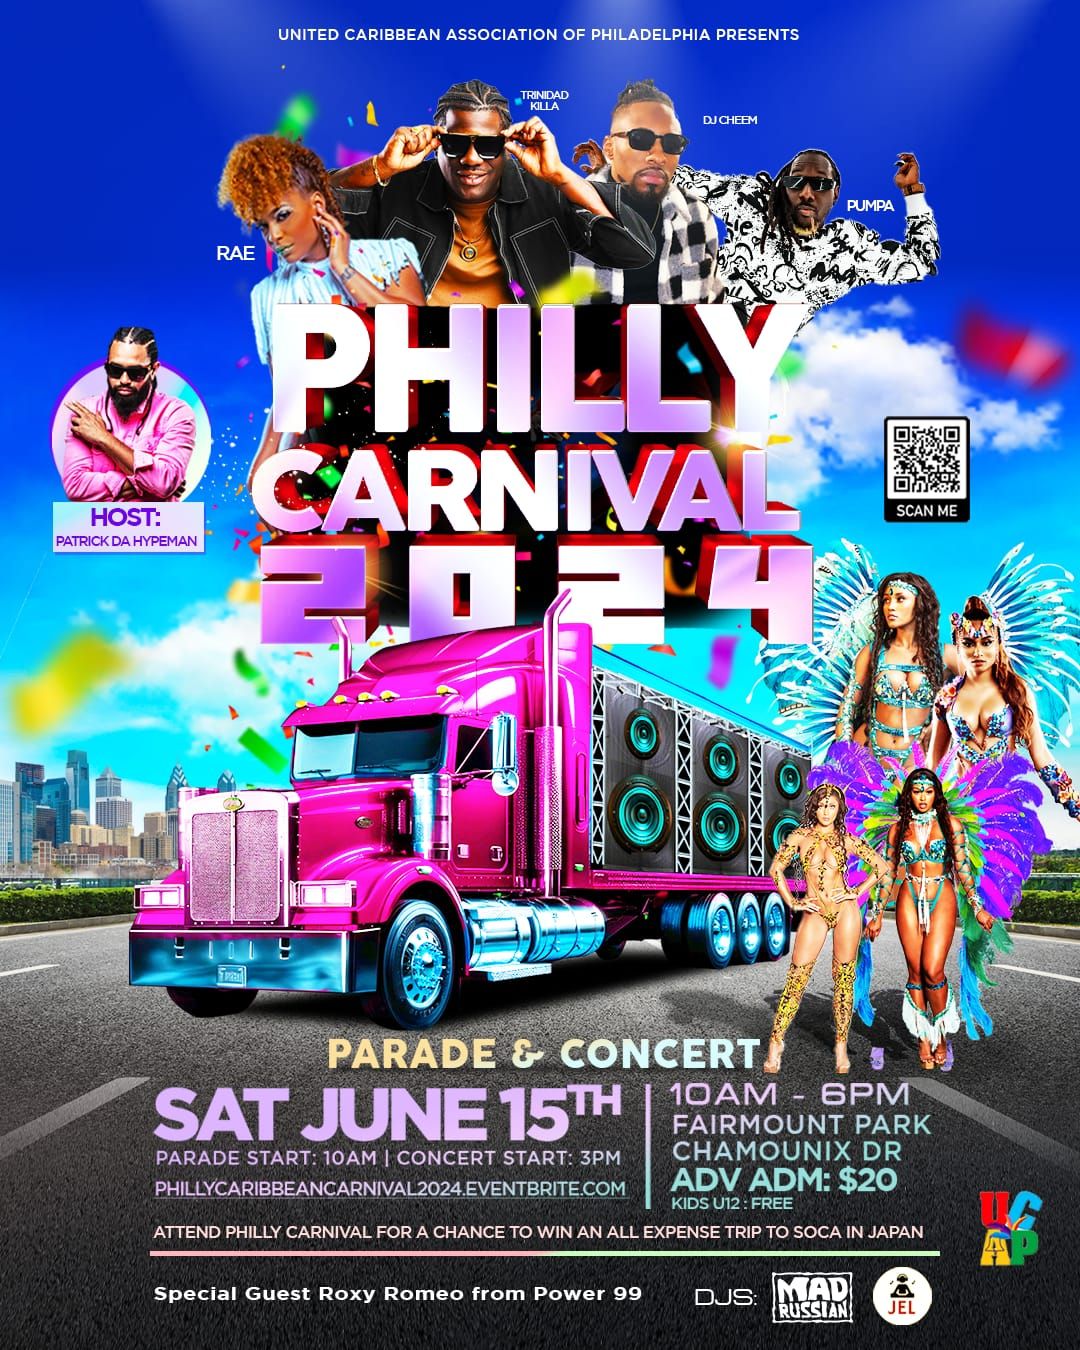 PHILLY CARIBBEAN CARNIVAL PARADE AND CONCERT